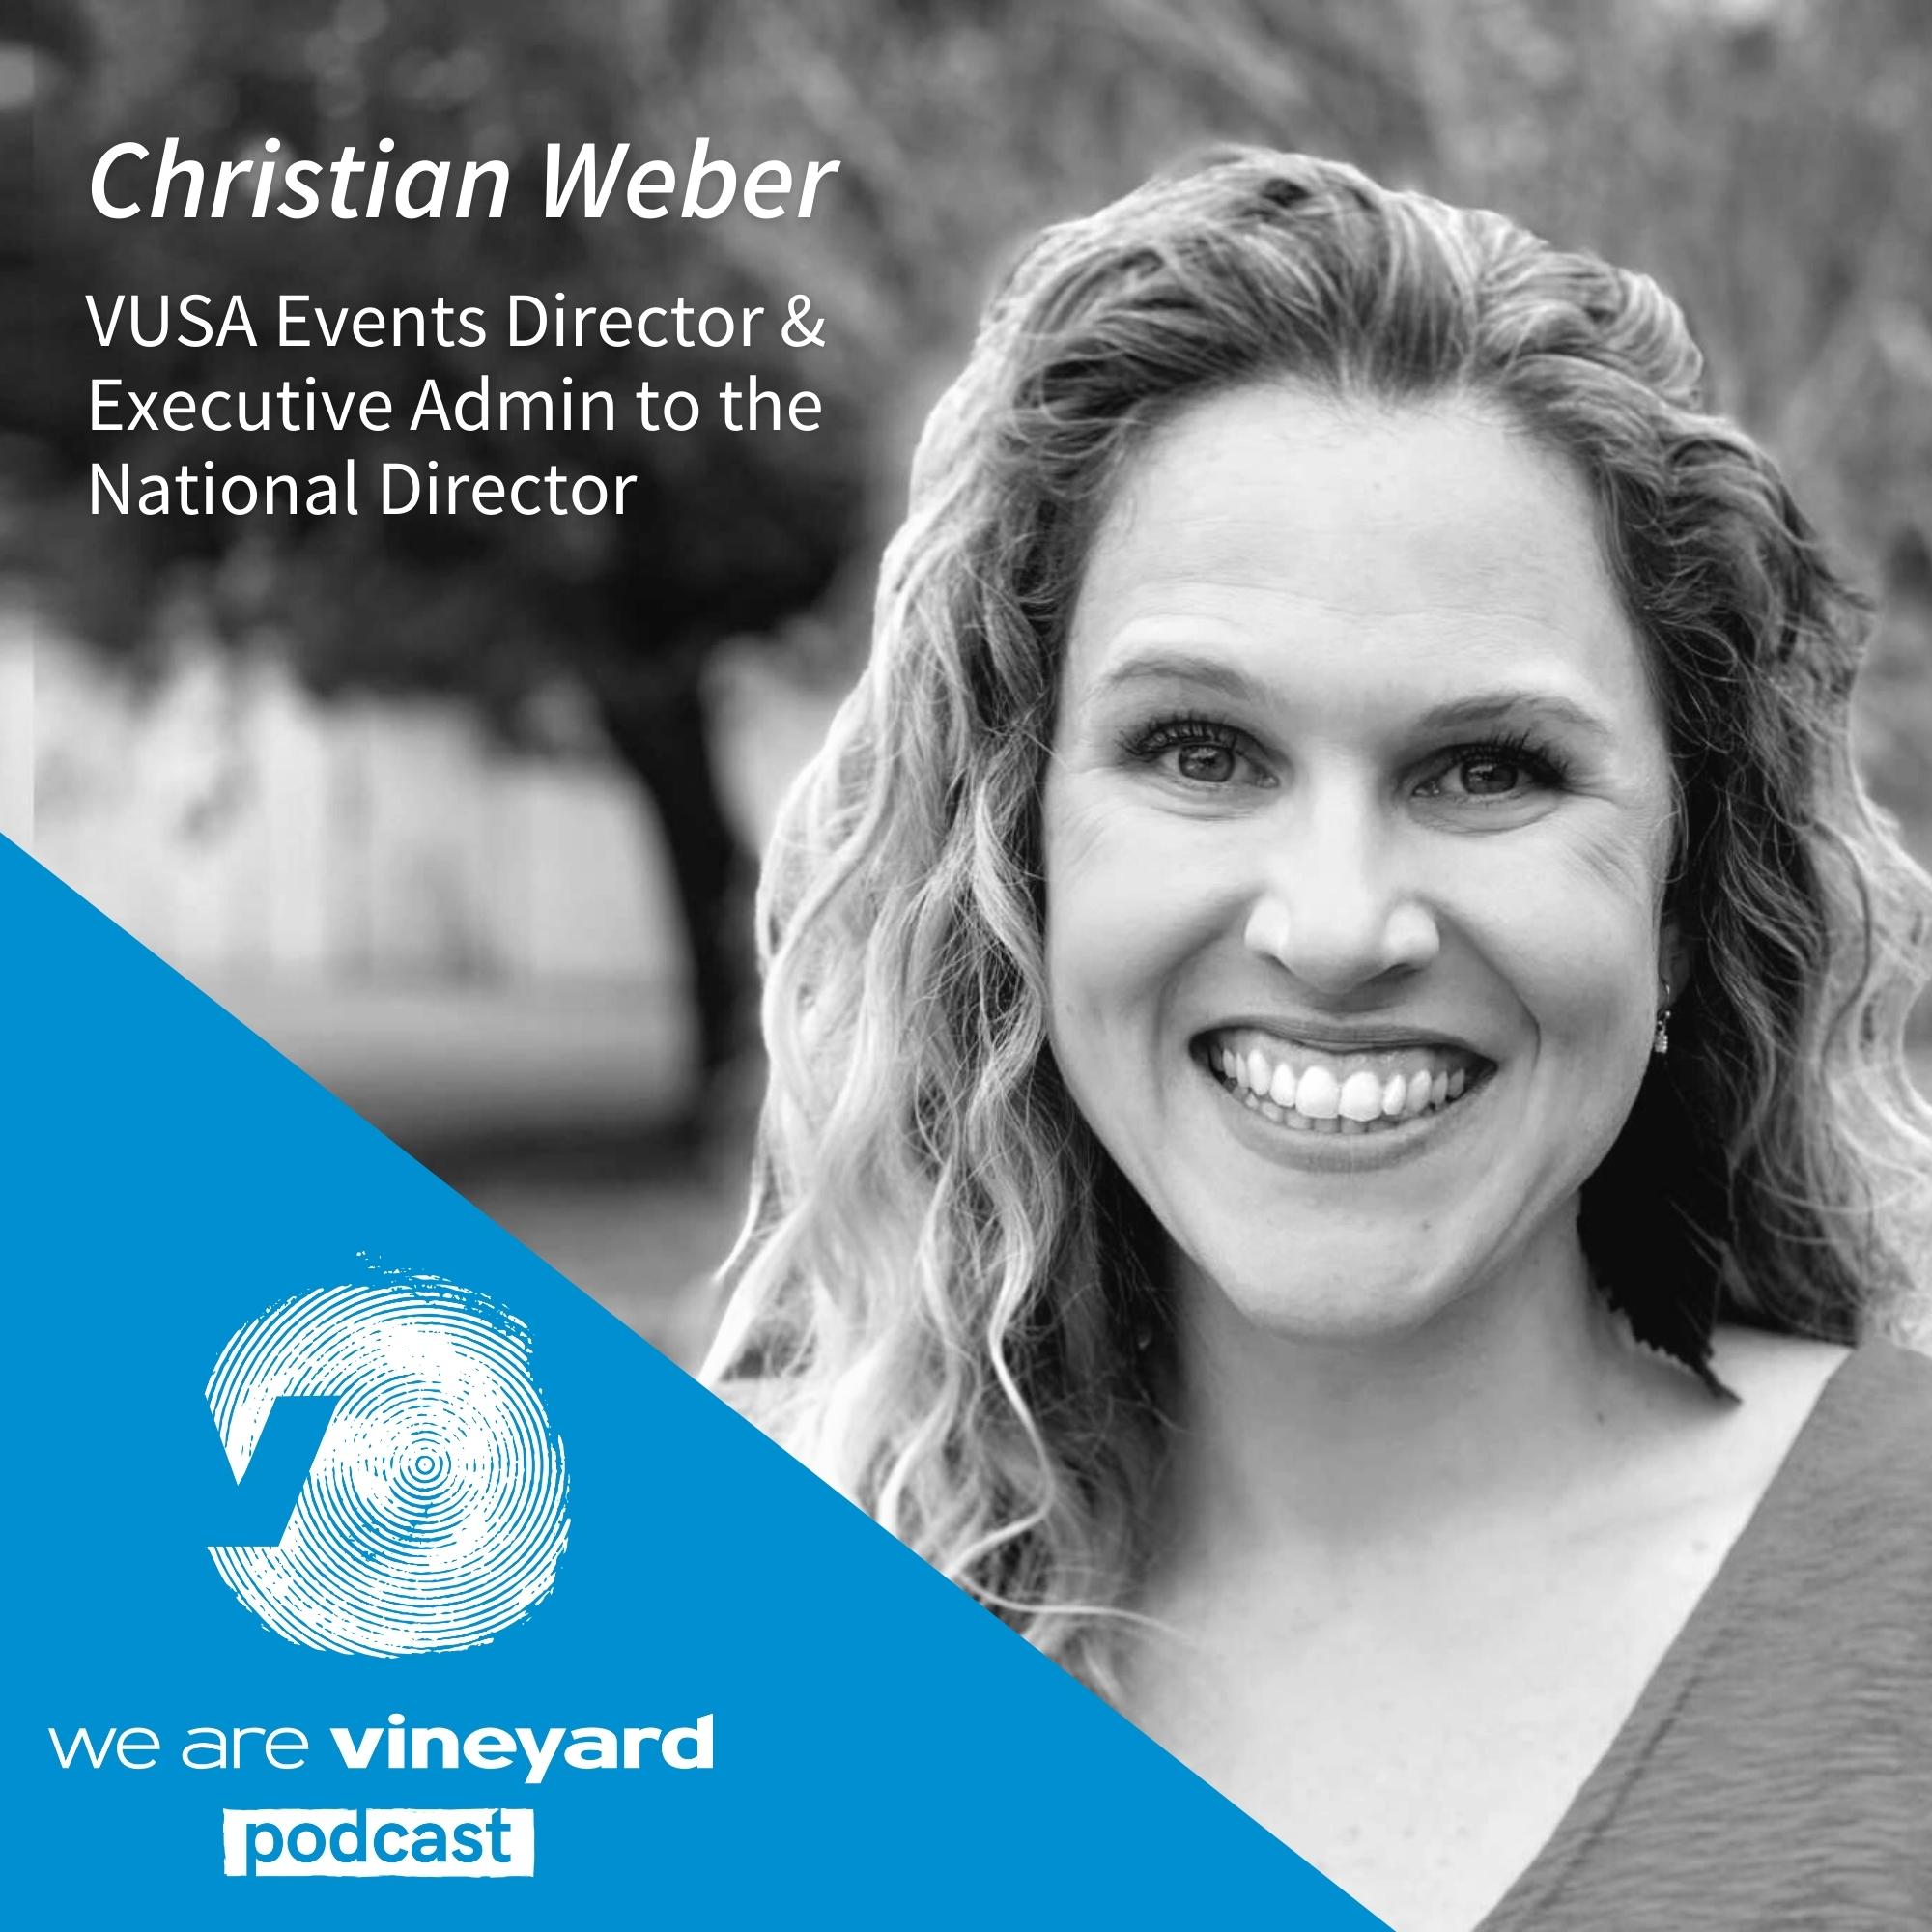 Christian Weber: Vineyard Events - Embracing Behind The Scenes Ministry